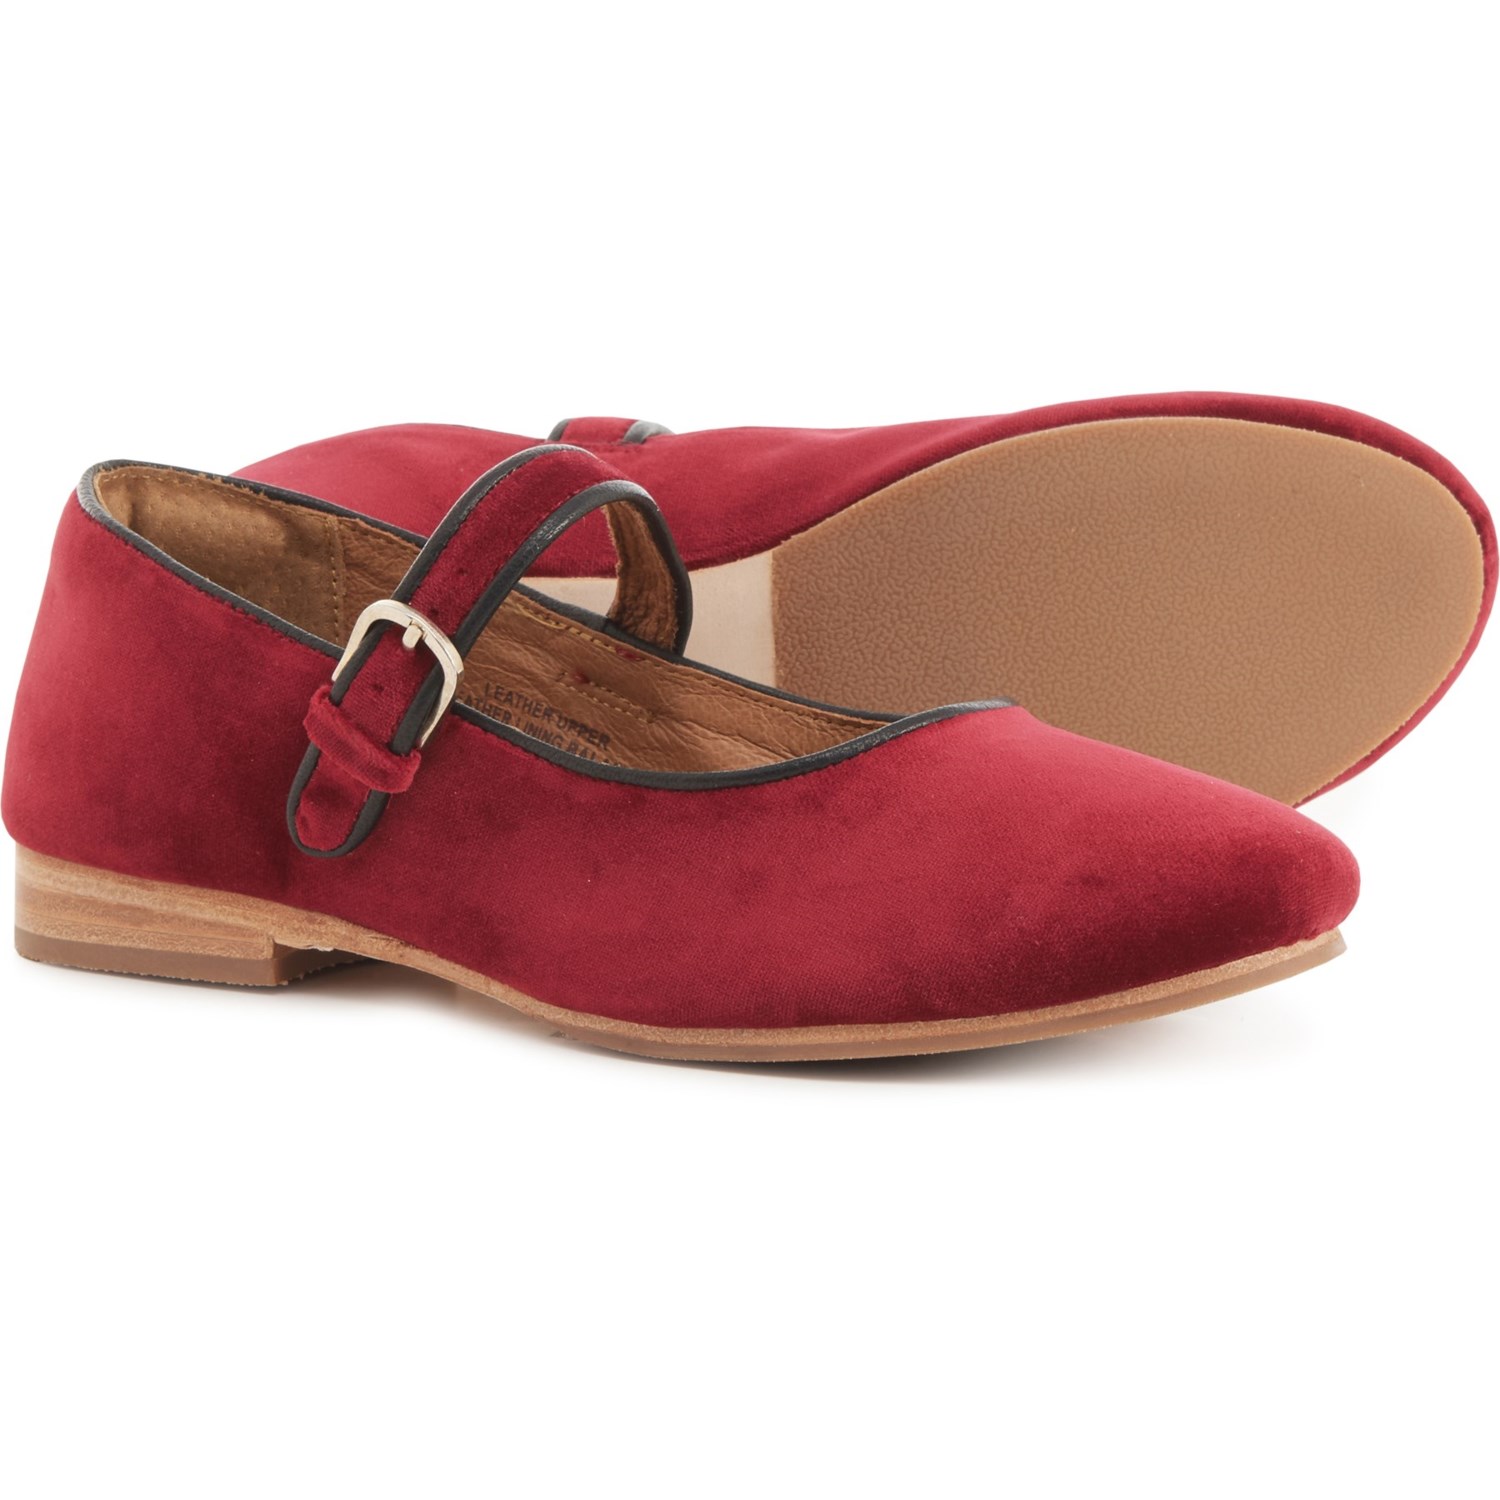 Sofft Kacey Mary Jane Shoes (For Women) - Save 68%